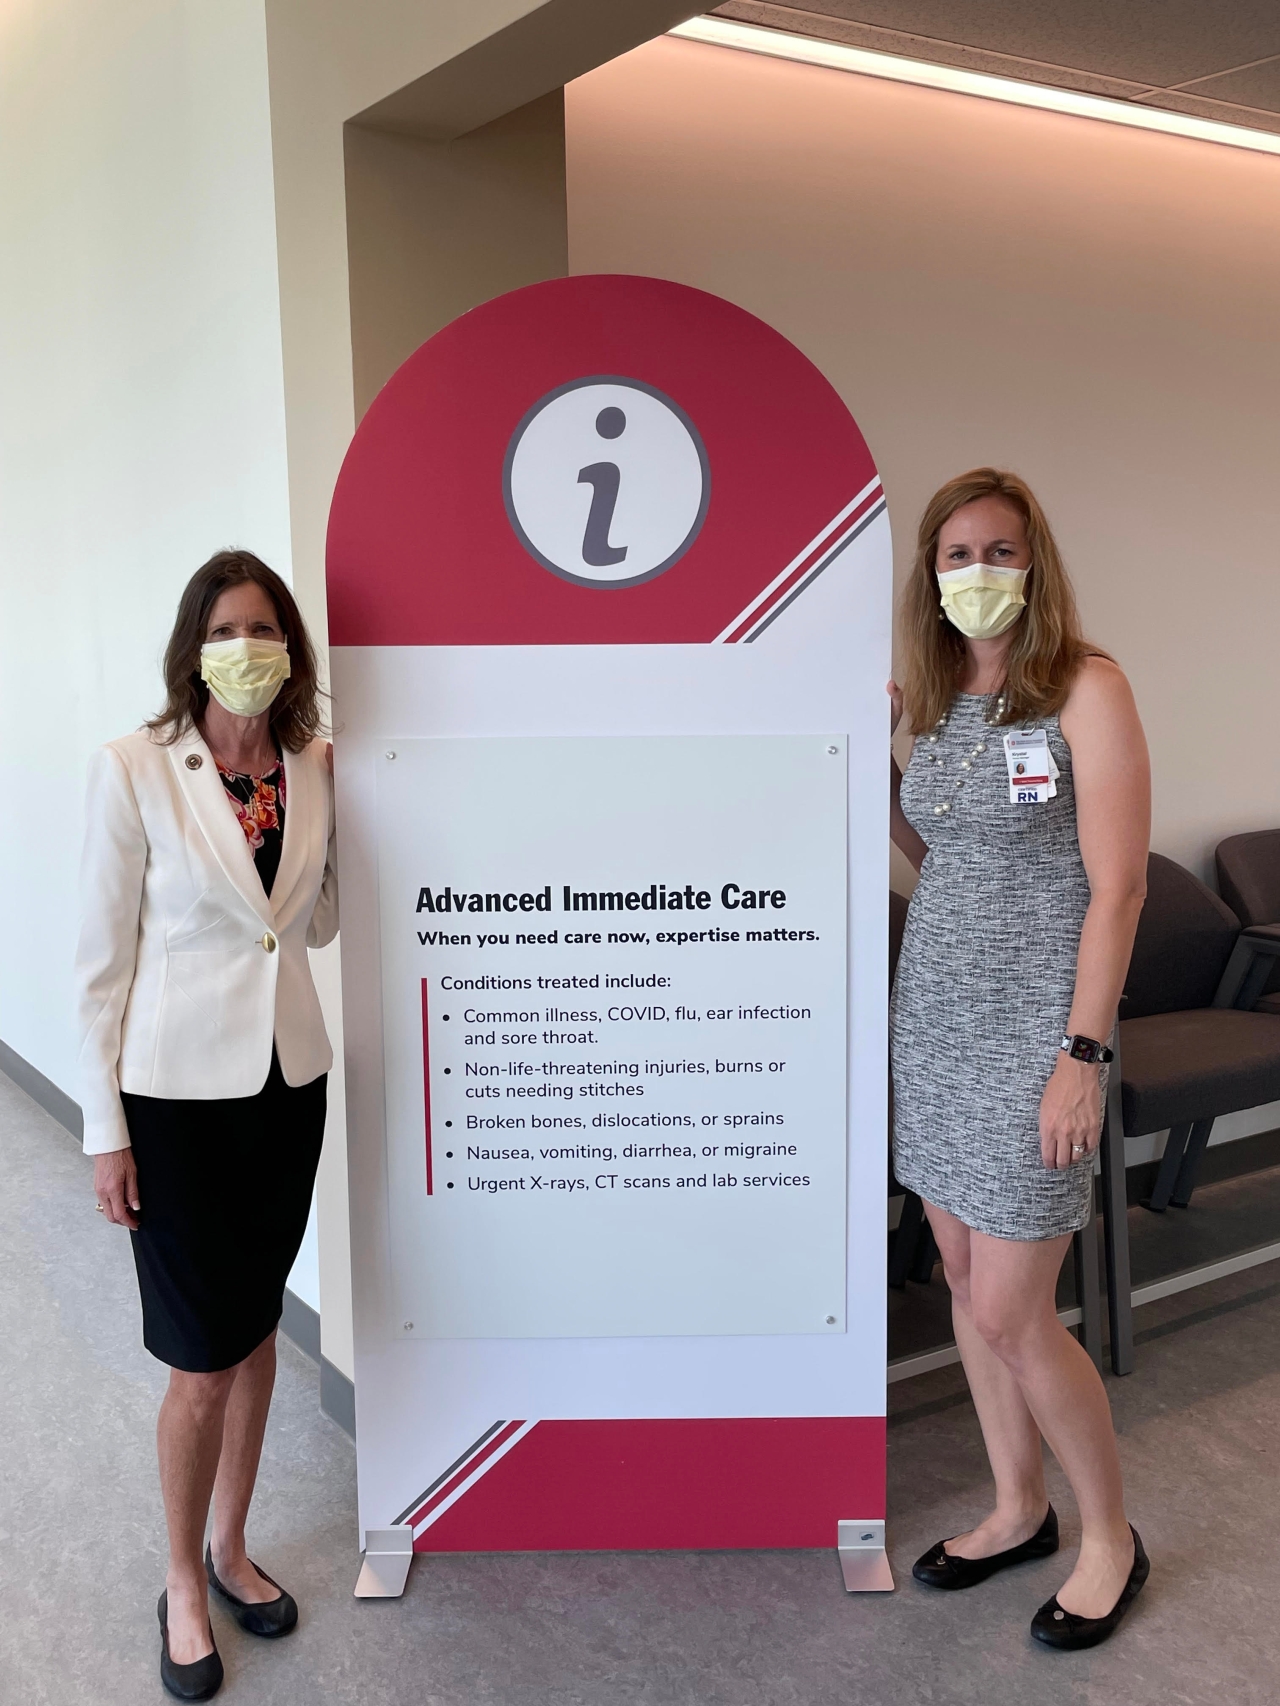 Representative Richardson learned about the services offered by the Advanced Immediate Care team at the Outpatient Care Dublin facility.